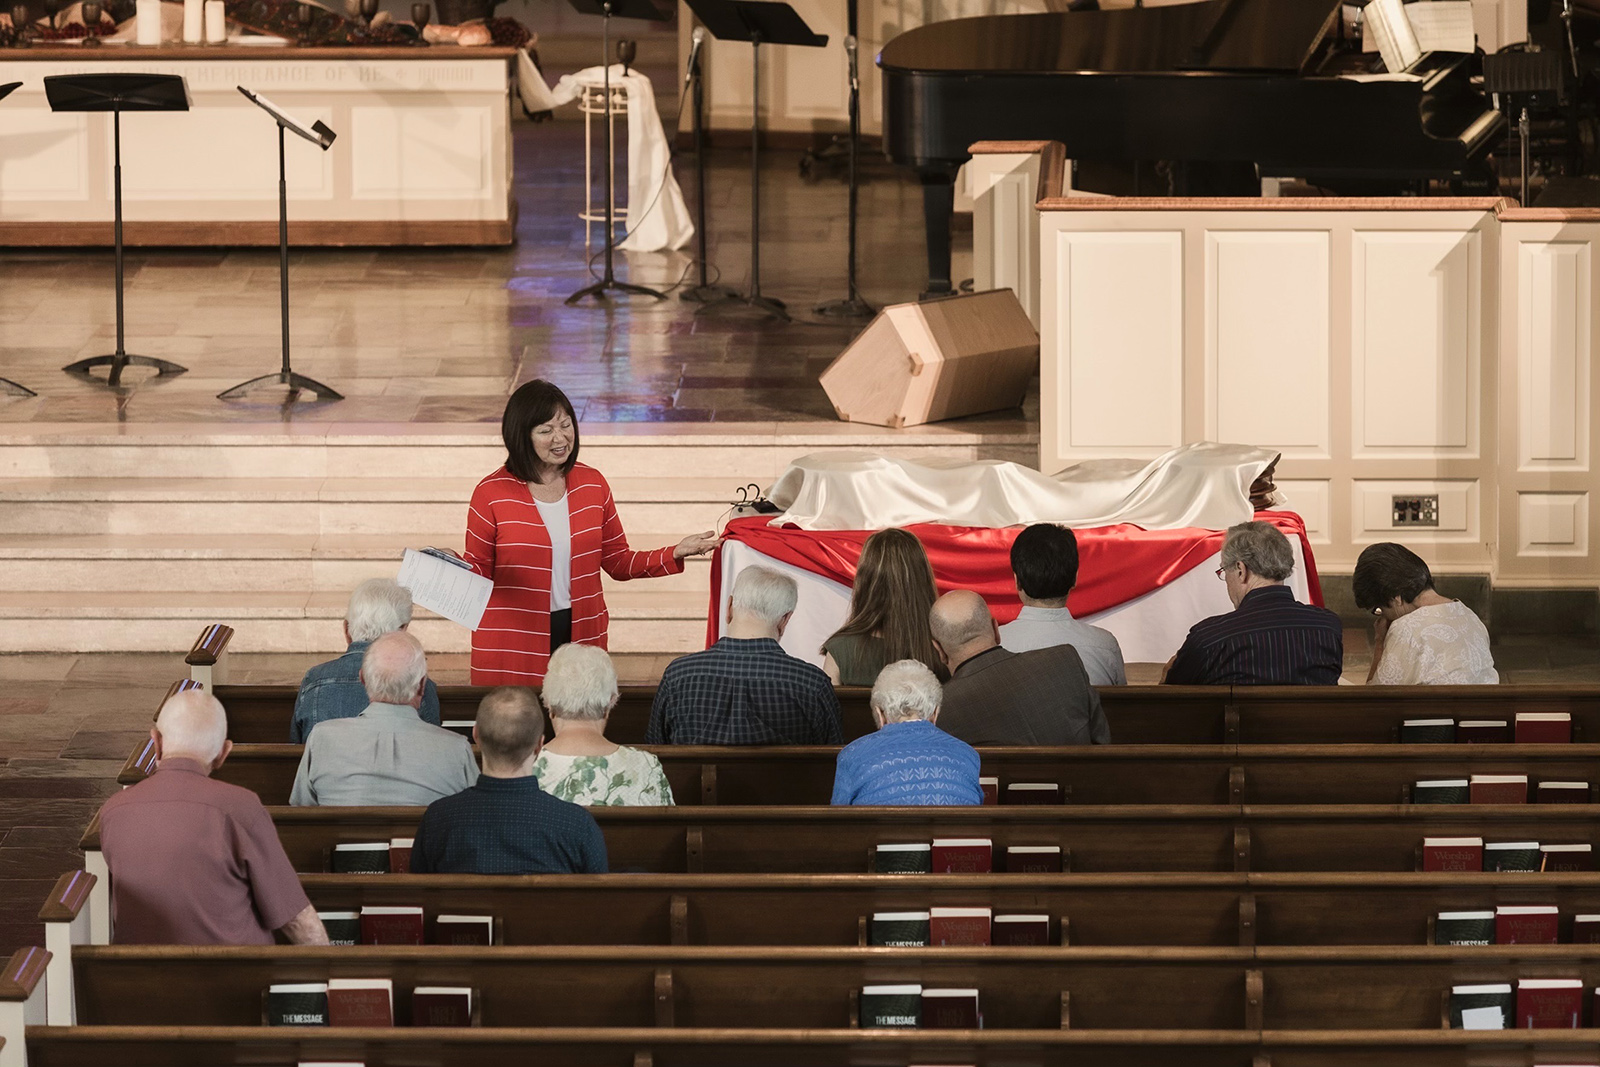 The Rev. Carma Wood, top left, leads communion server preparation at Park Place Church of God in Anderson, Indiana, prior to her retirement. (Photo by Kim Butler)